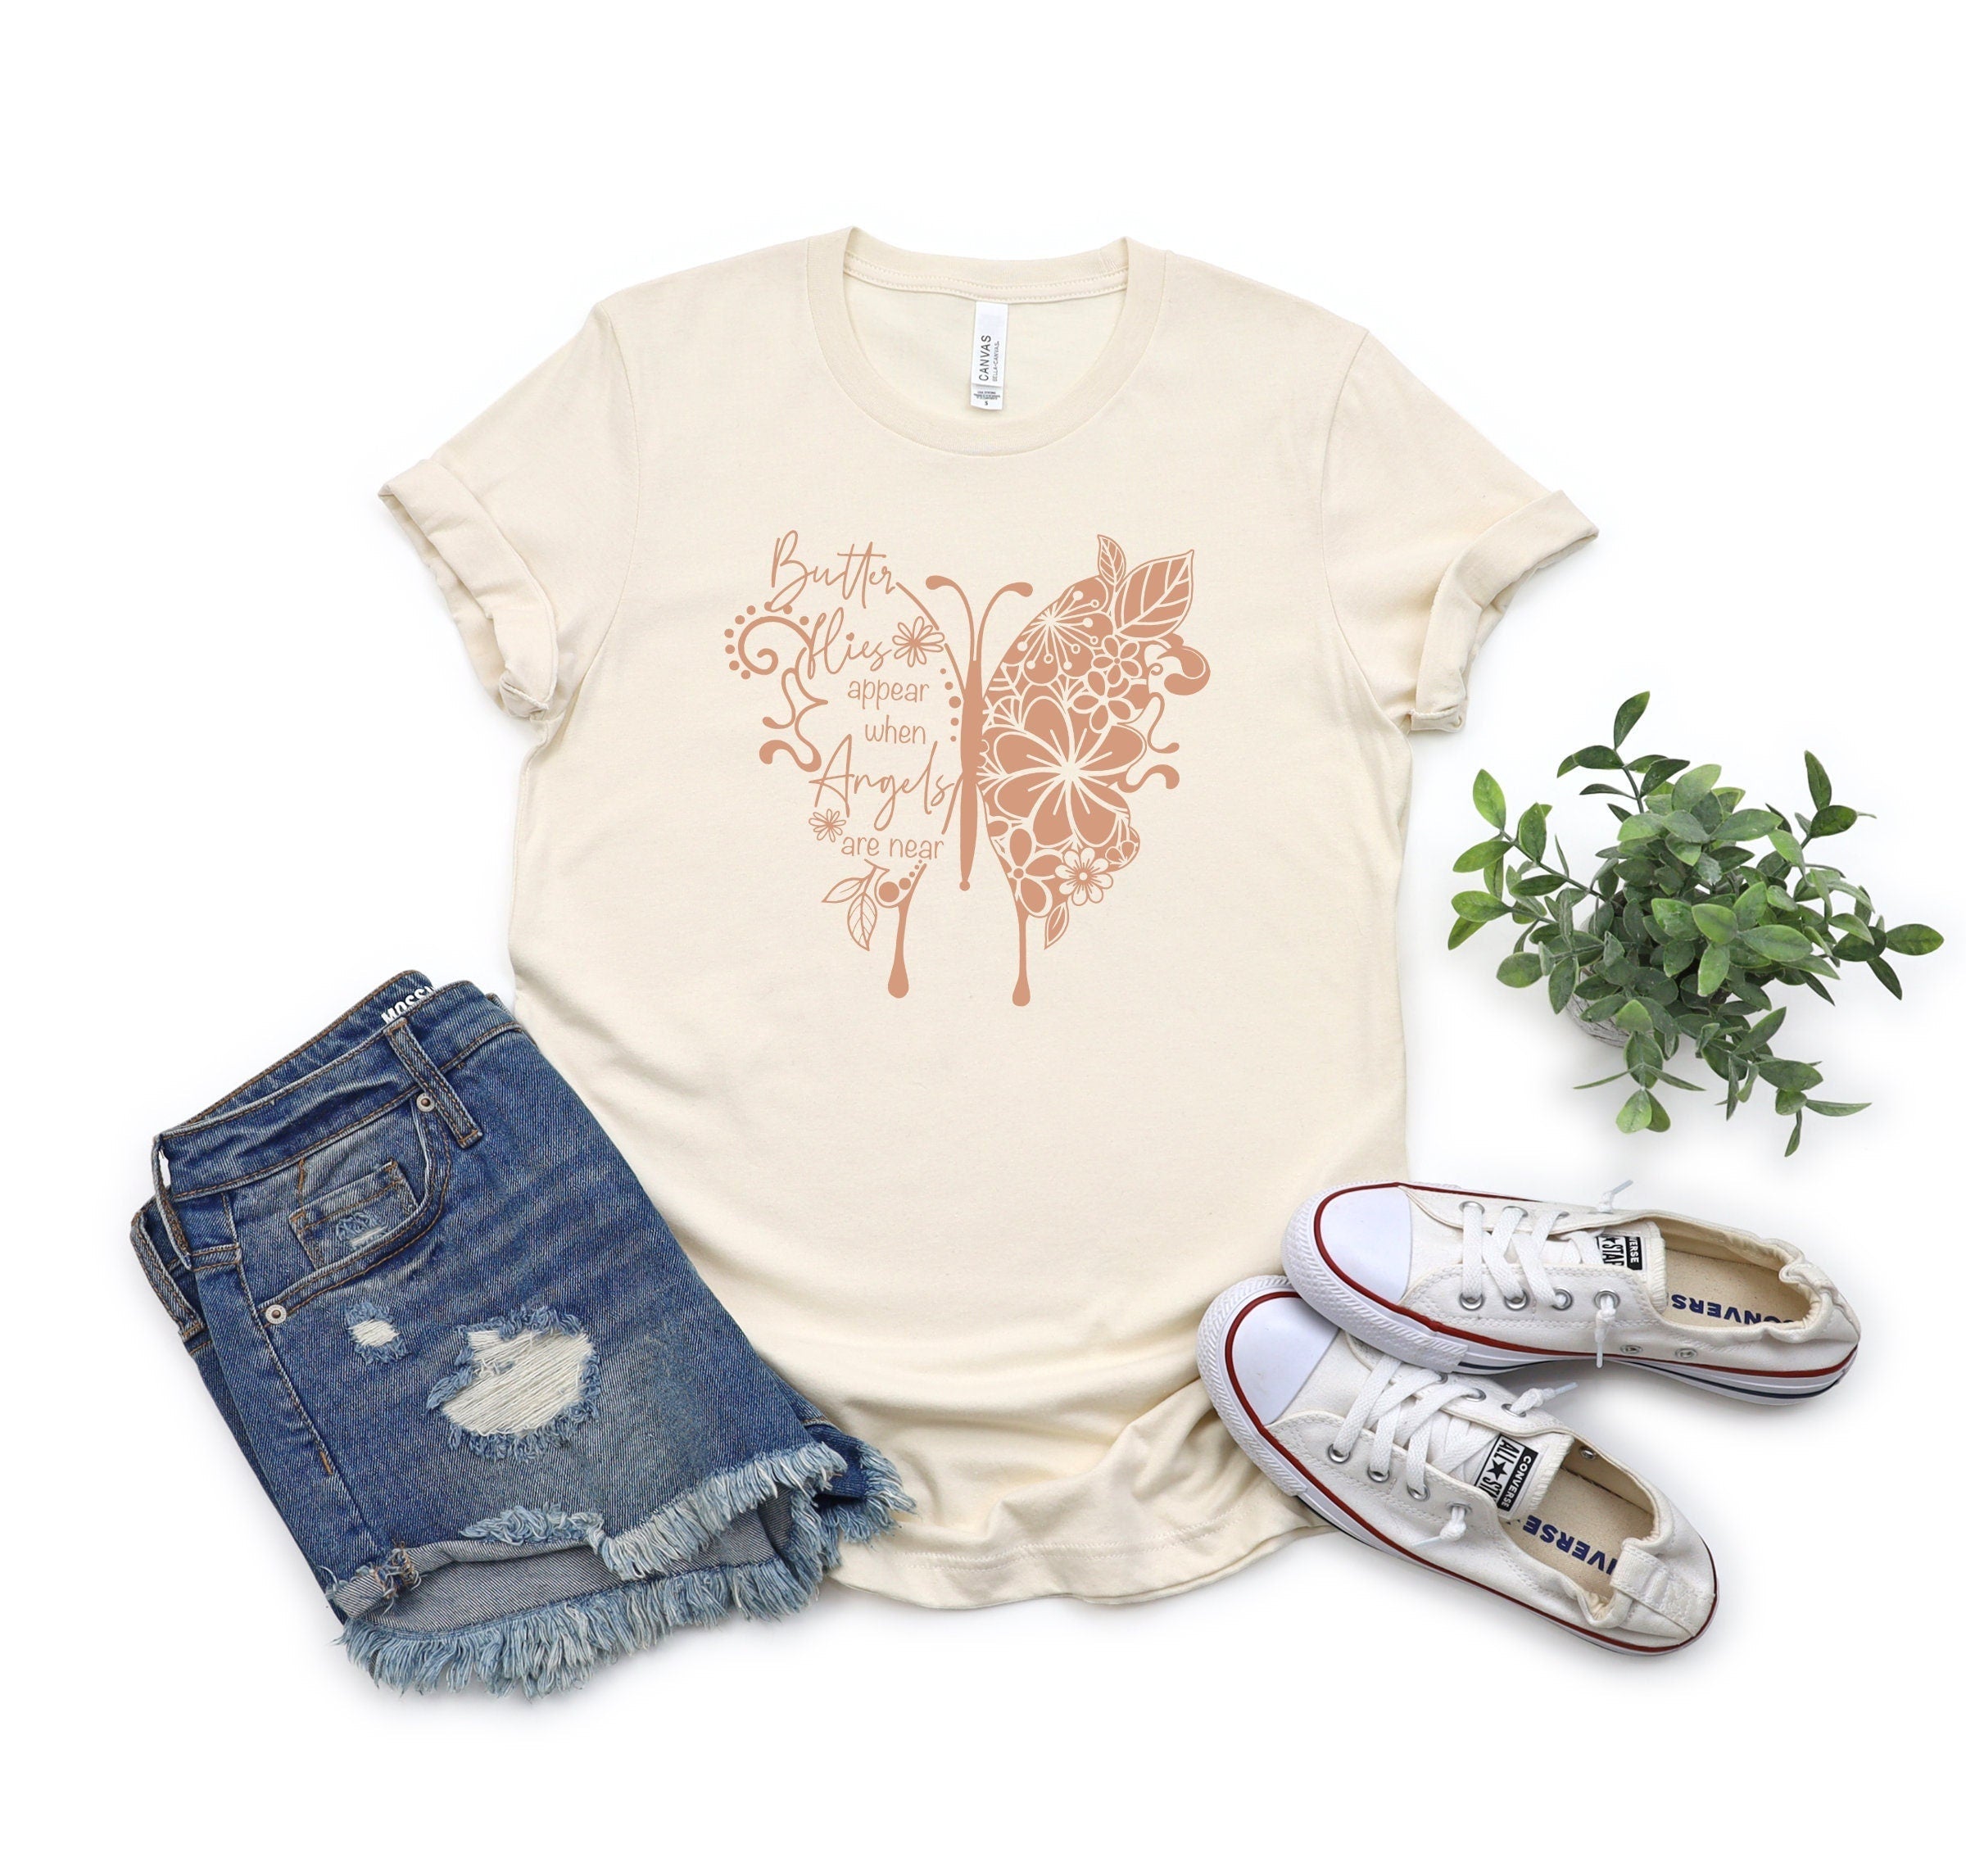 Butterflies Appear When Angels Are near Tee, Grieving Mother Shirt, Miscarriage